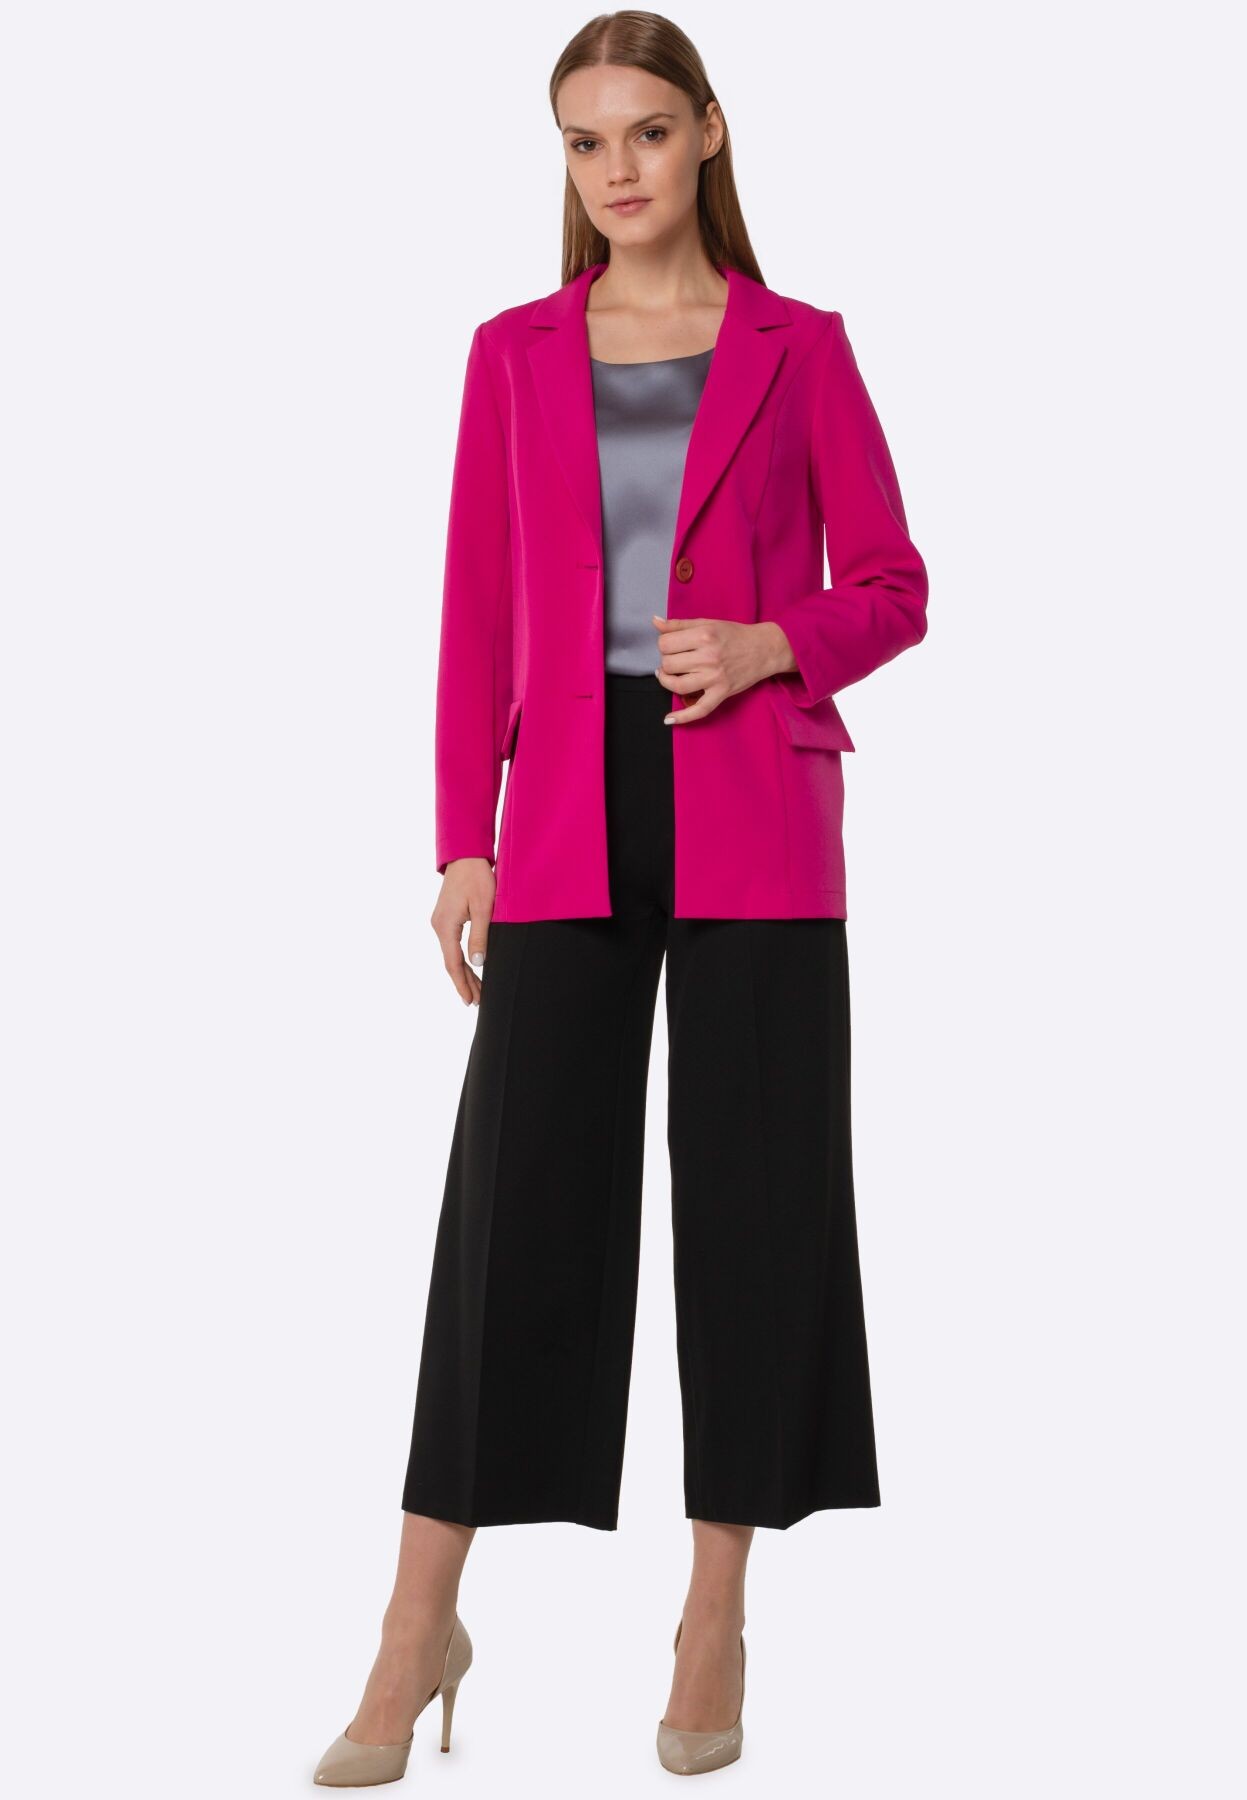 Jacket without lining in cyclamen color 3327